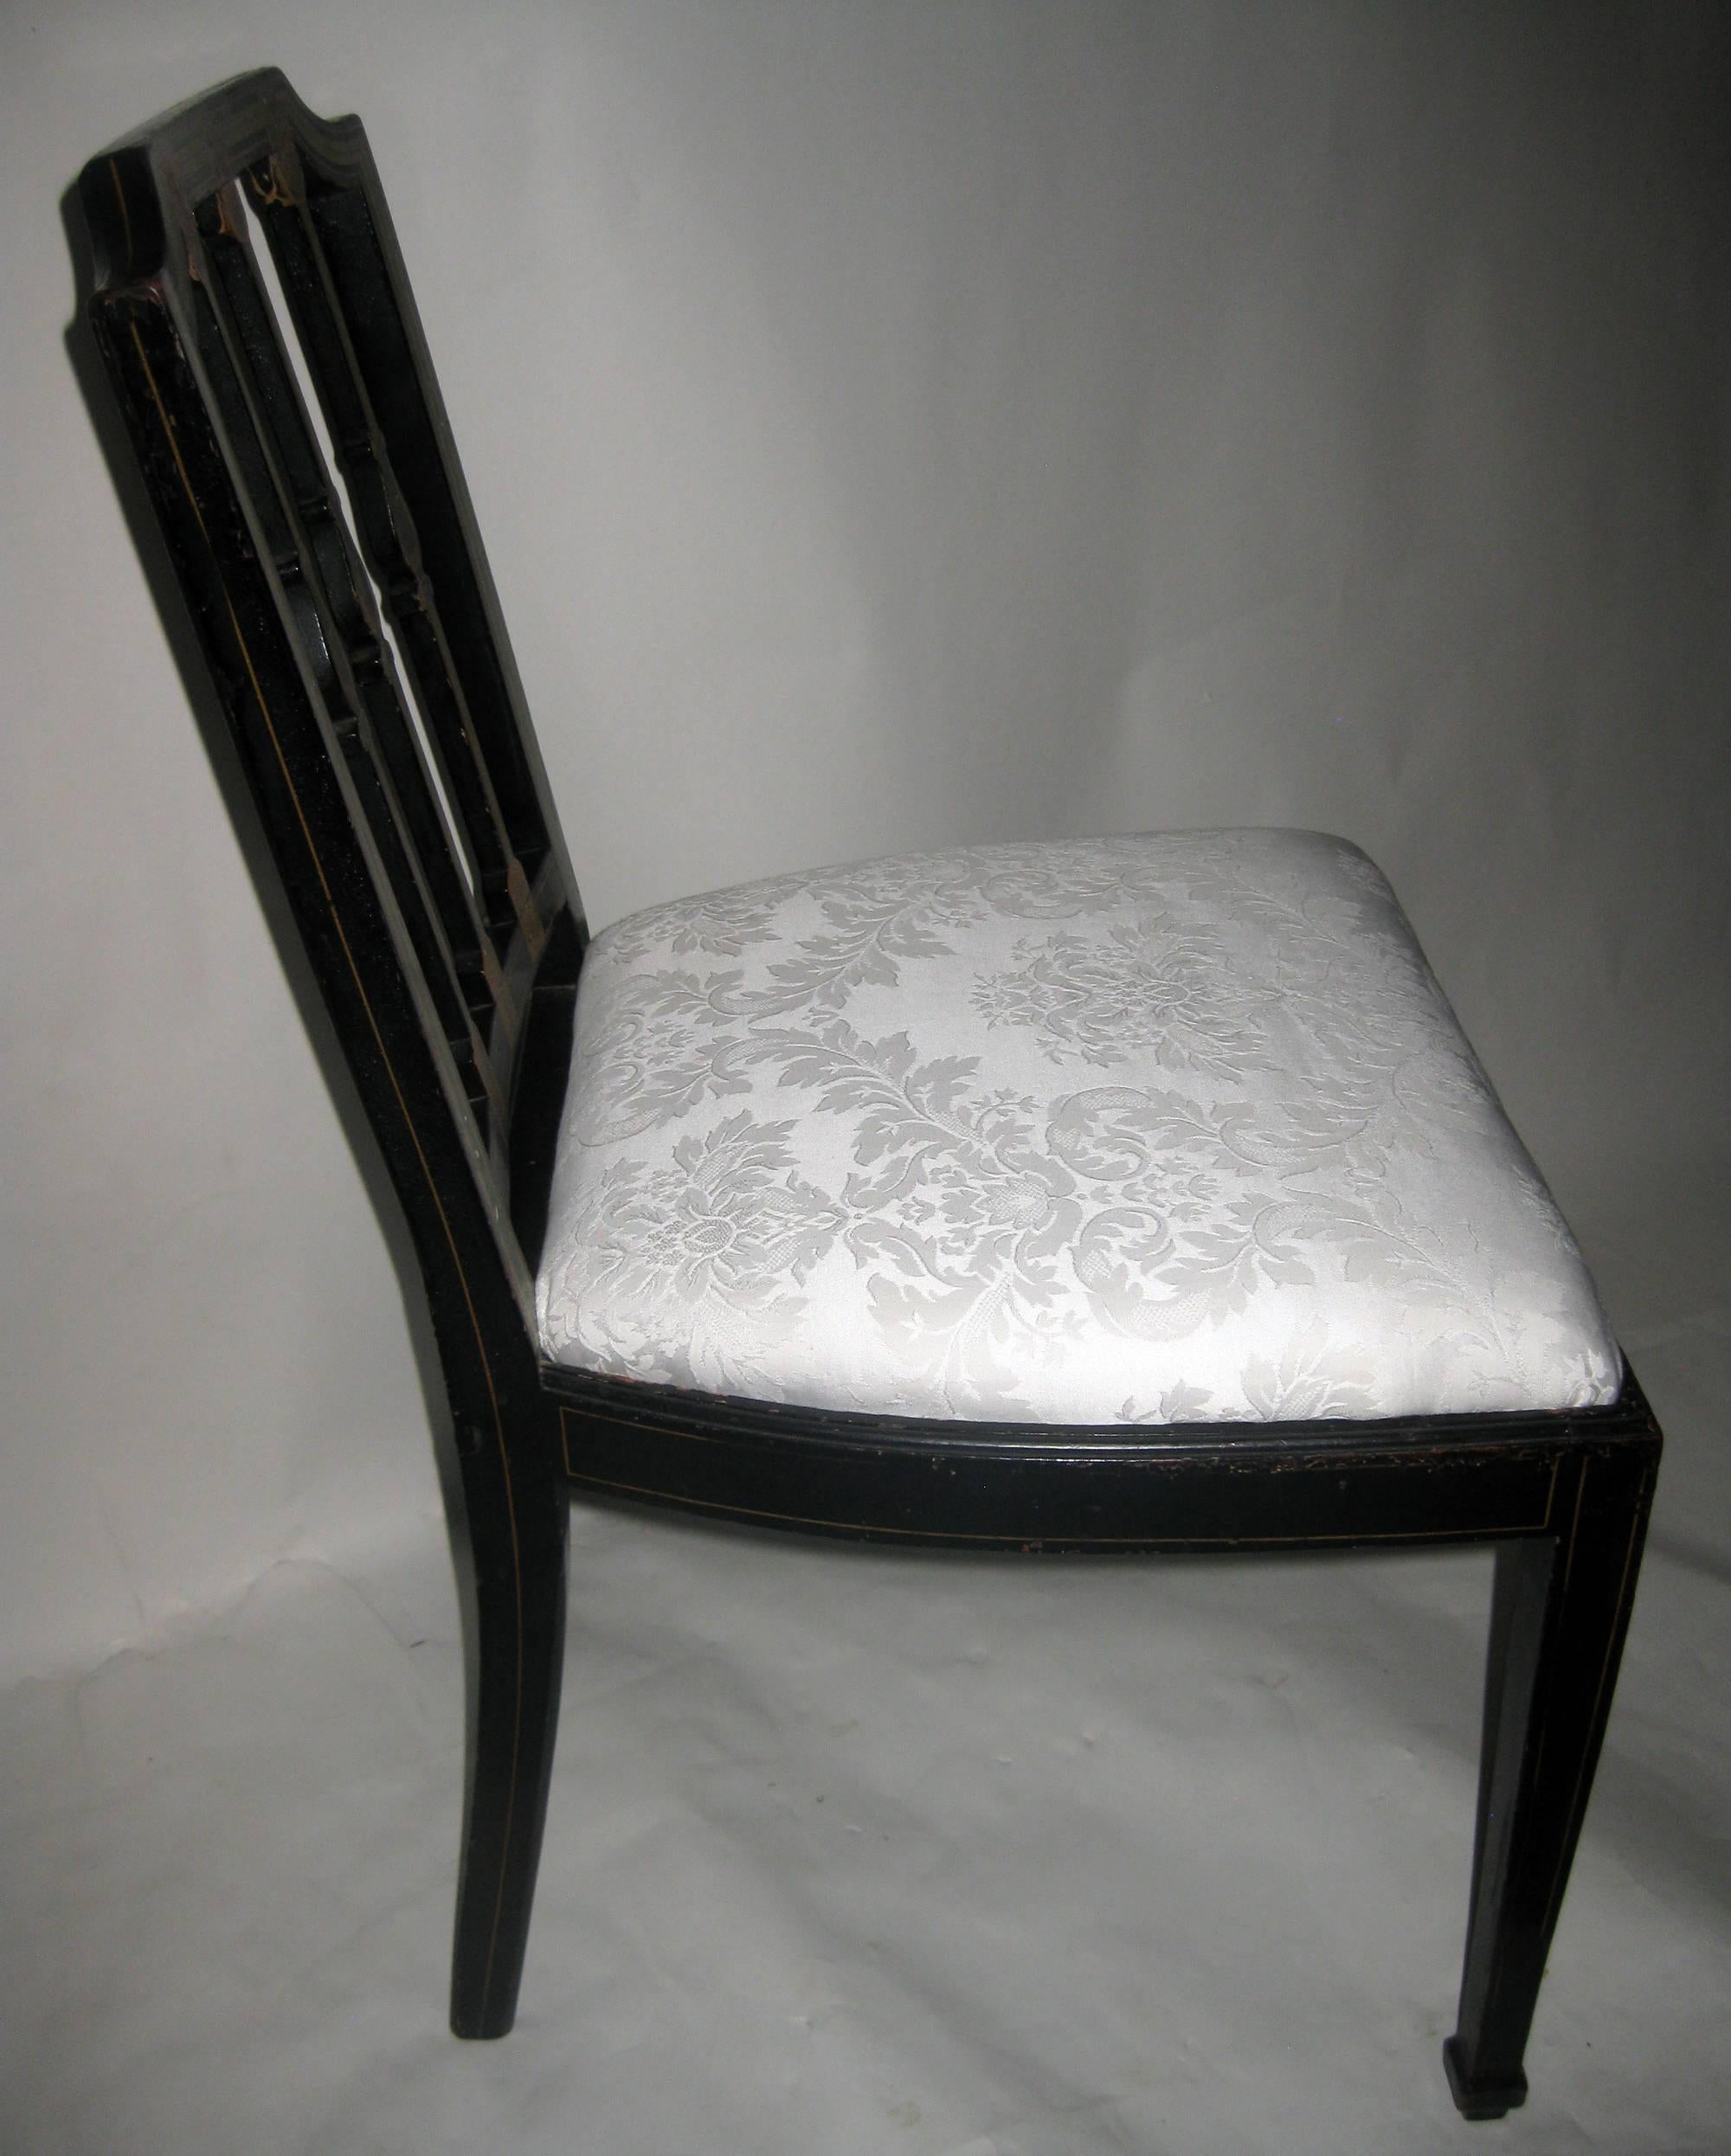 19th century George III Painted Side Chair in the Hepplewhite Style In Good Condition For Sale In Savannah, GA